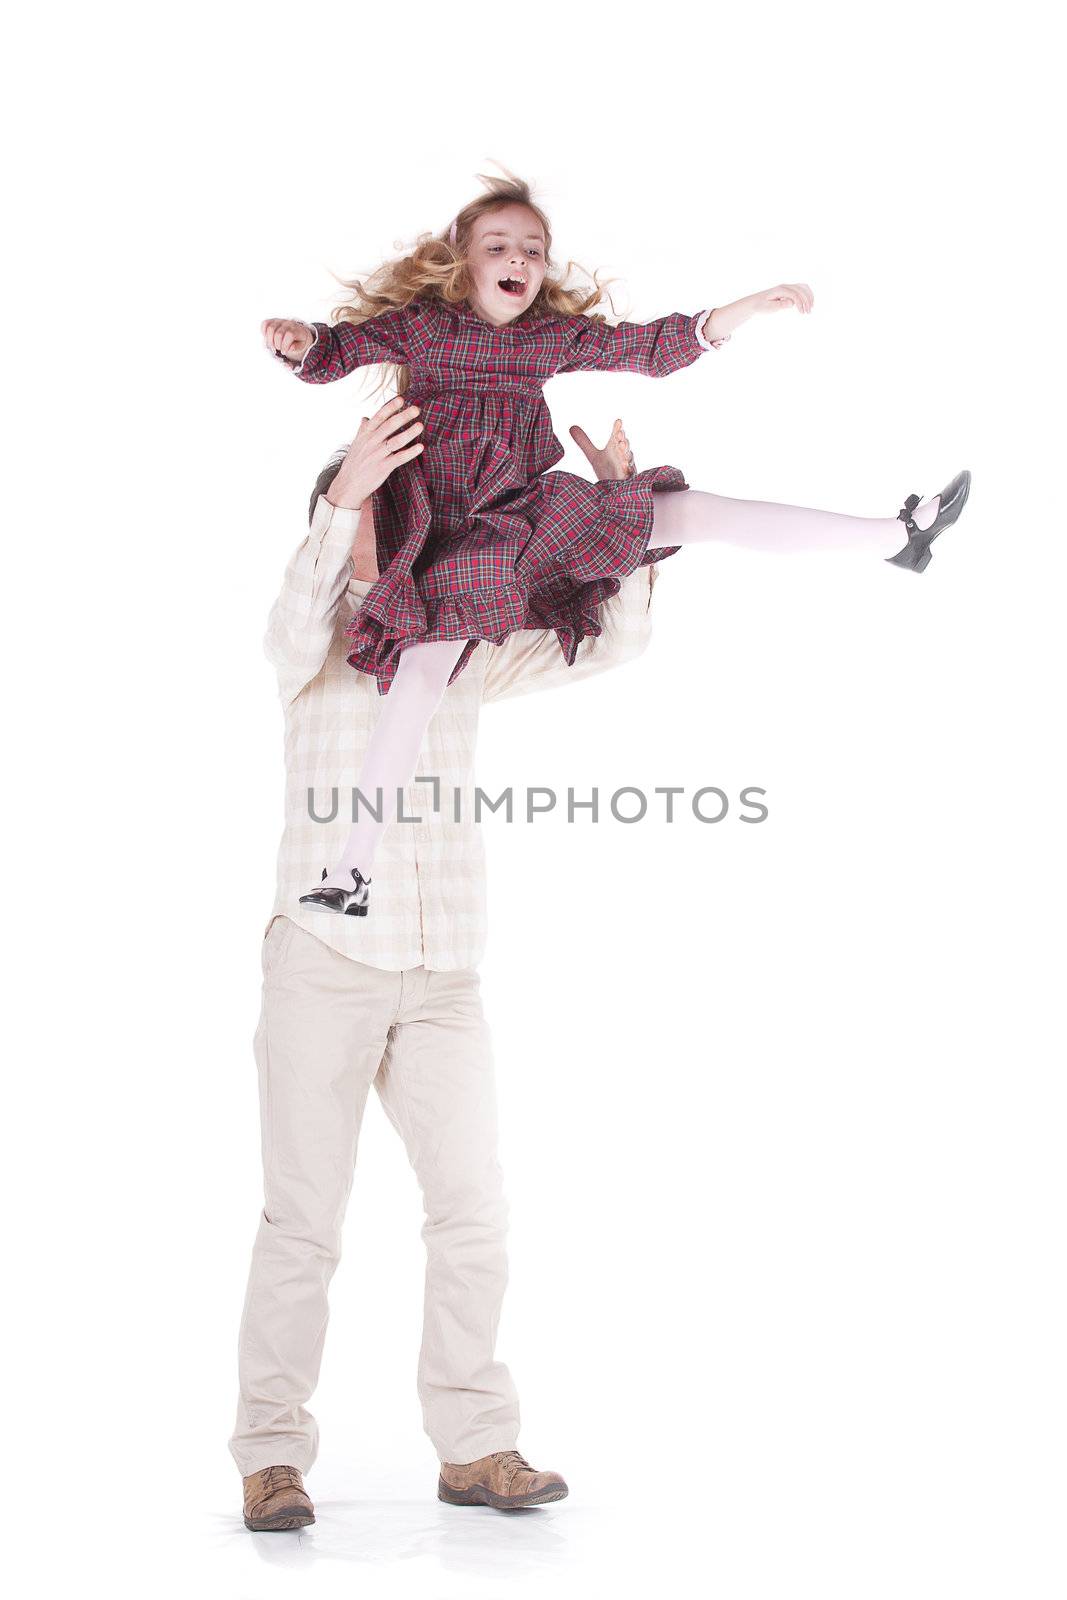 Playng with my dad - flying girl in studio